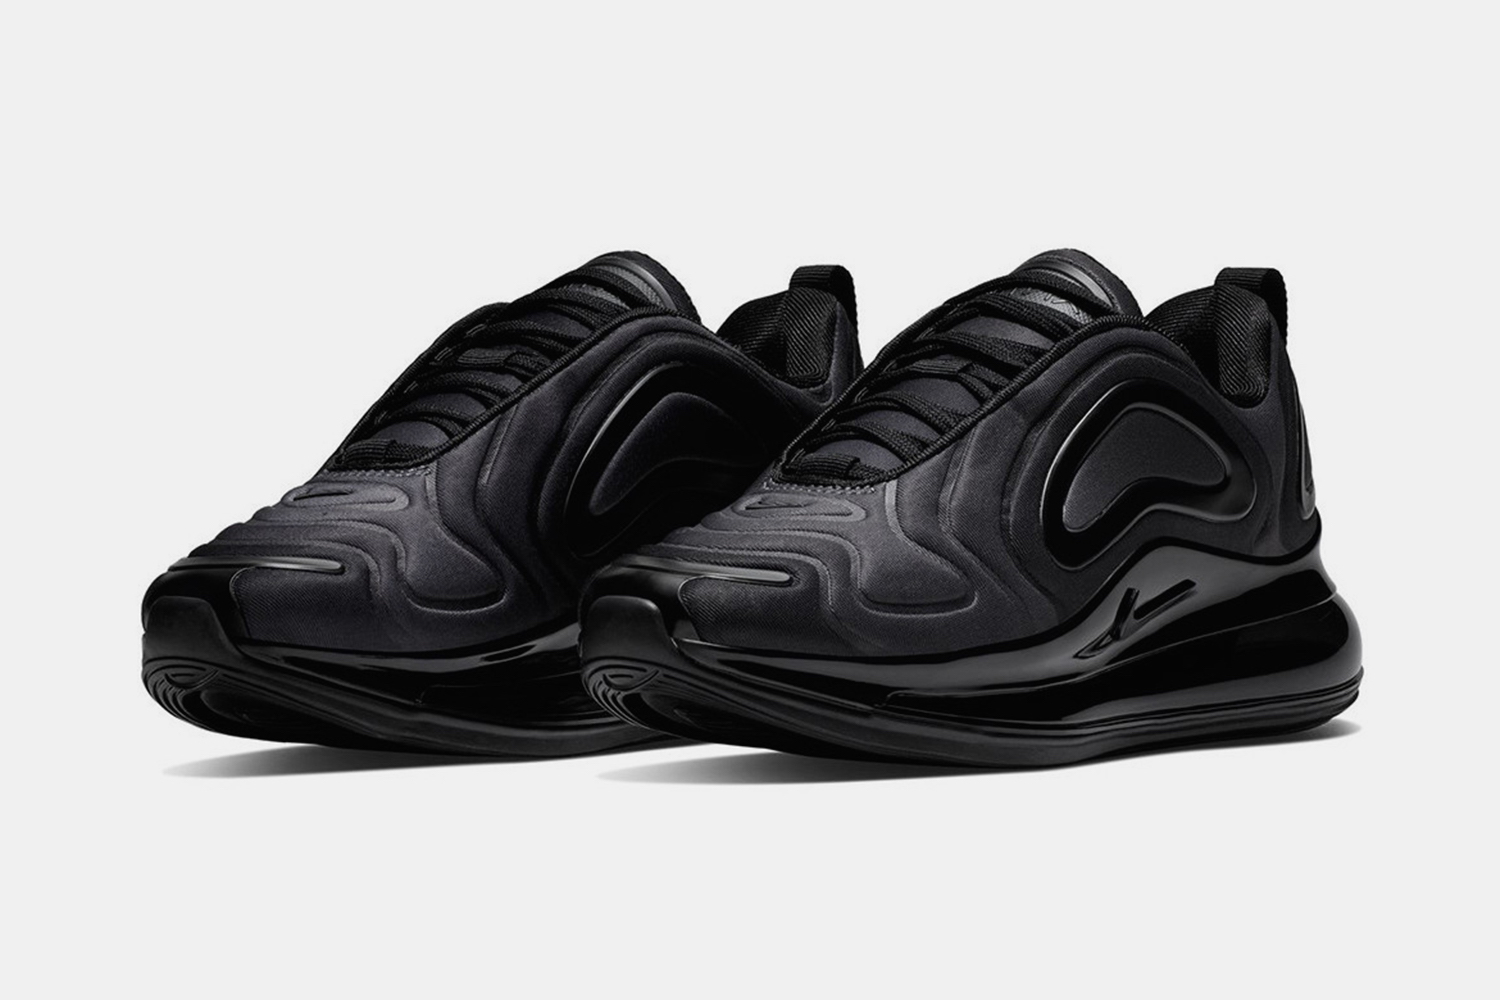 Mob Classroom Execute Nike Air Max 720 "Triple Black": Release Date, Pricing & More Info